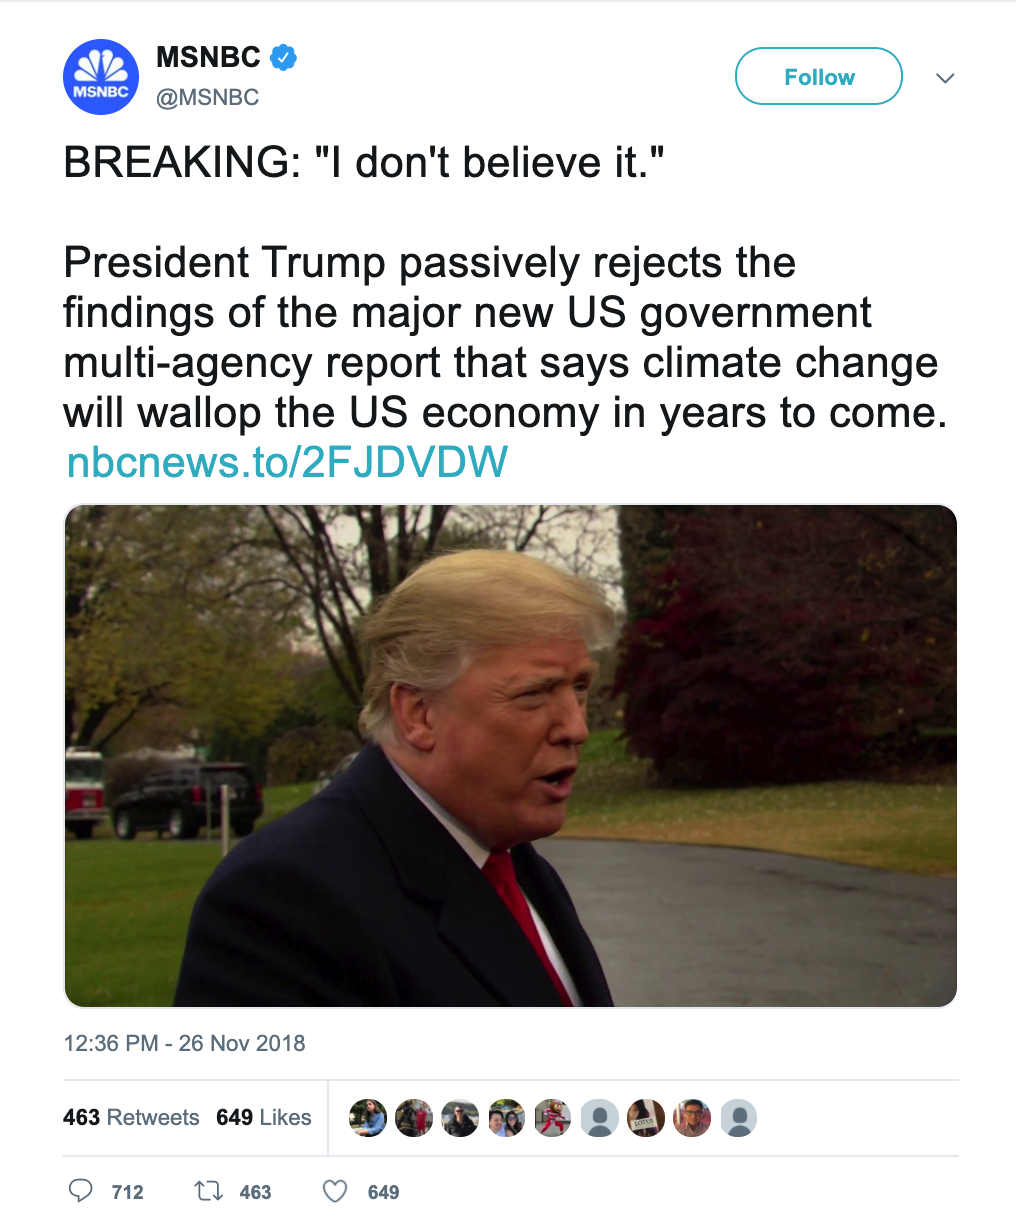 Tweet from MSNBC that says: BREAKING: 'I don't believe it.'
							President Trump passively rejects the findings of the major new US government multi-agency report that says climate change will wallop the US economy in years to come.